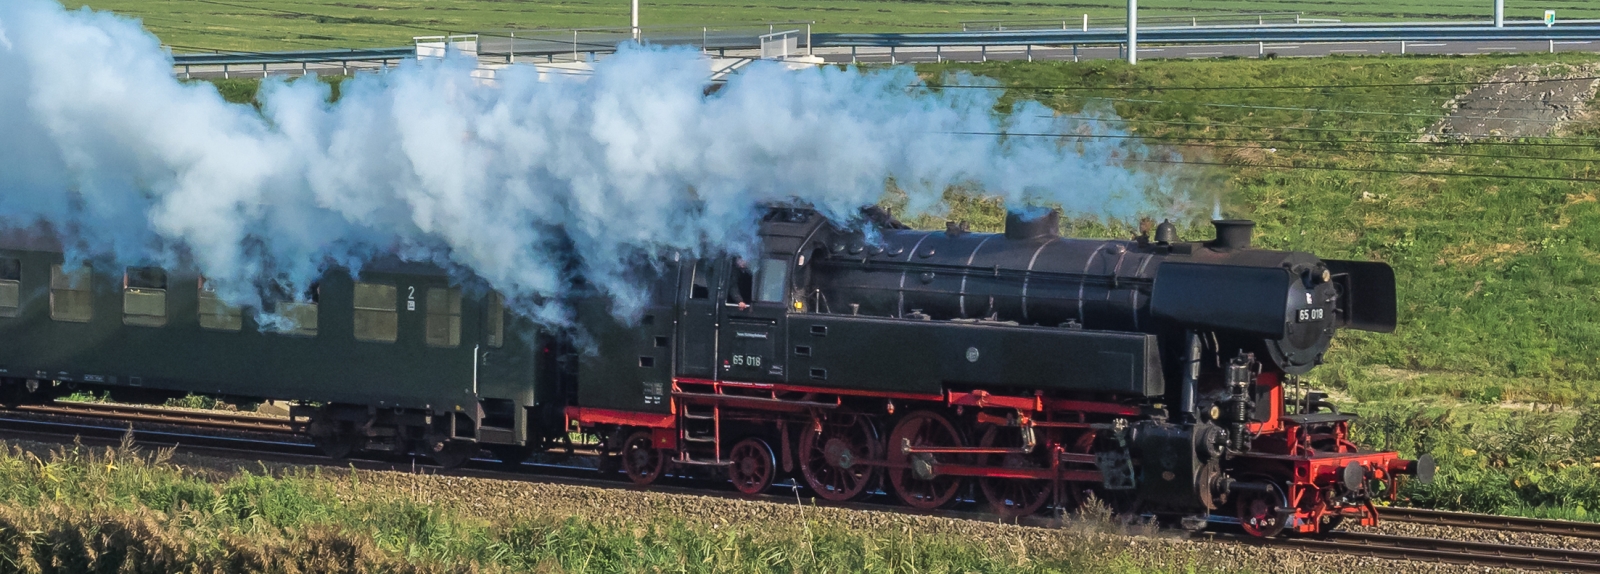 65 018 in use at Stoom Stichting Nederland in October 2015